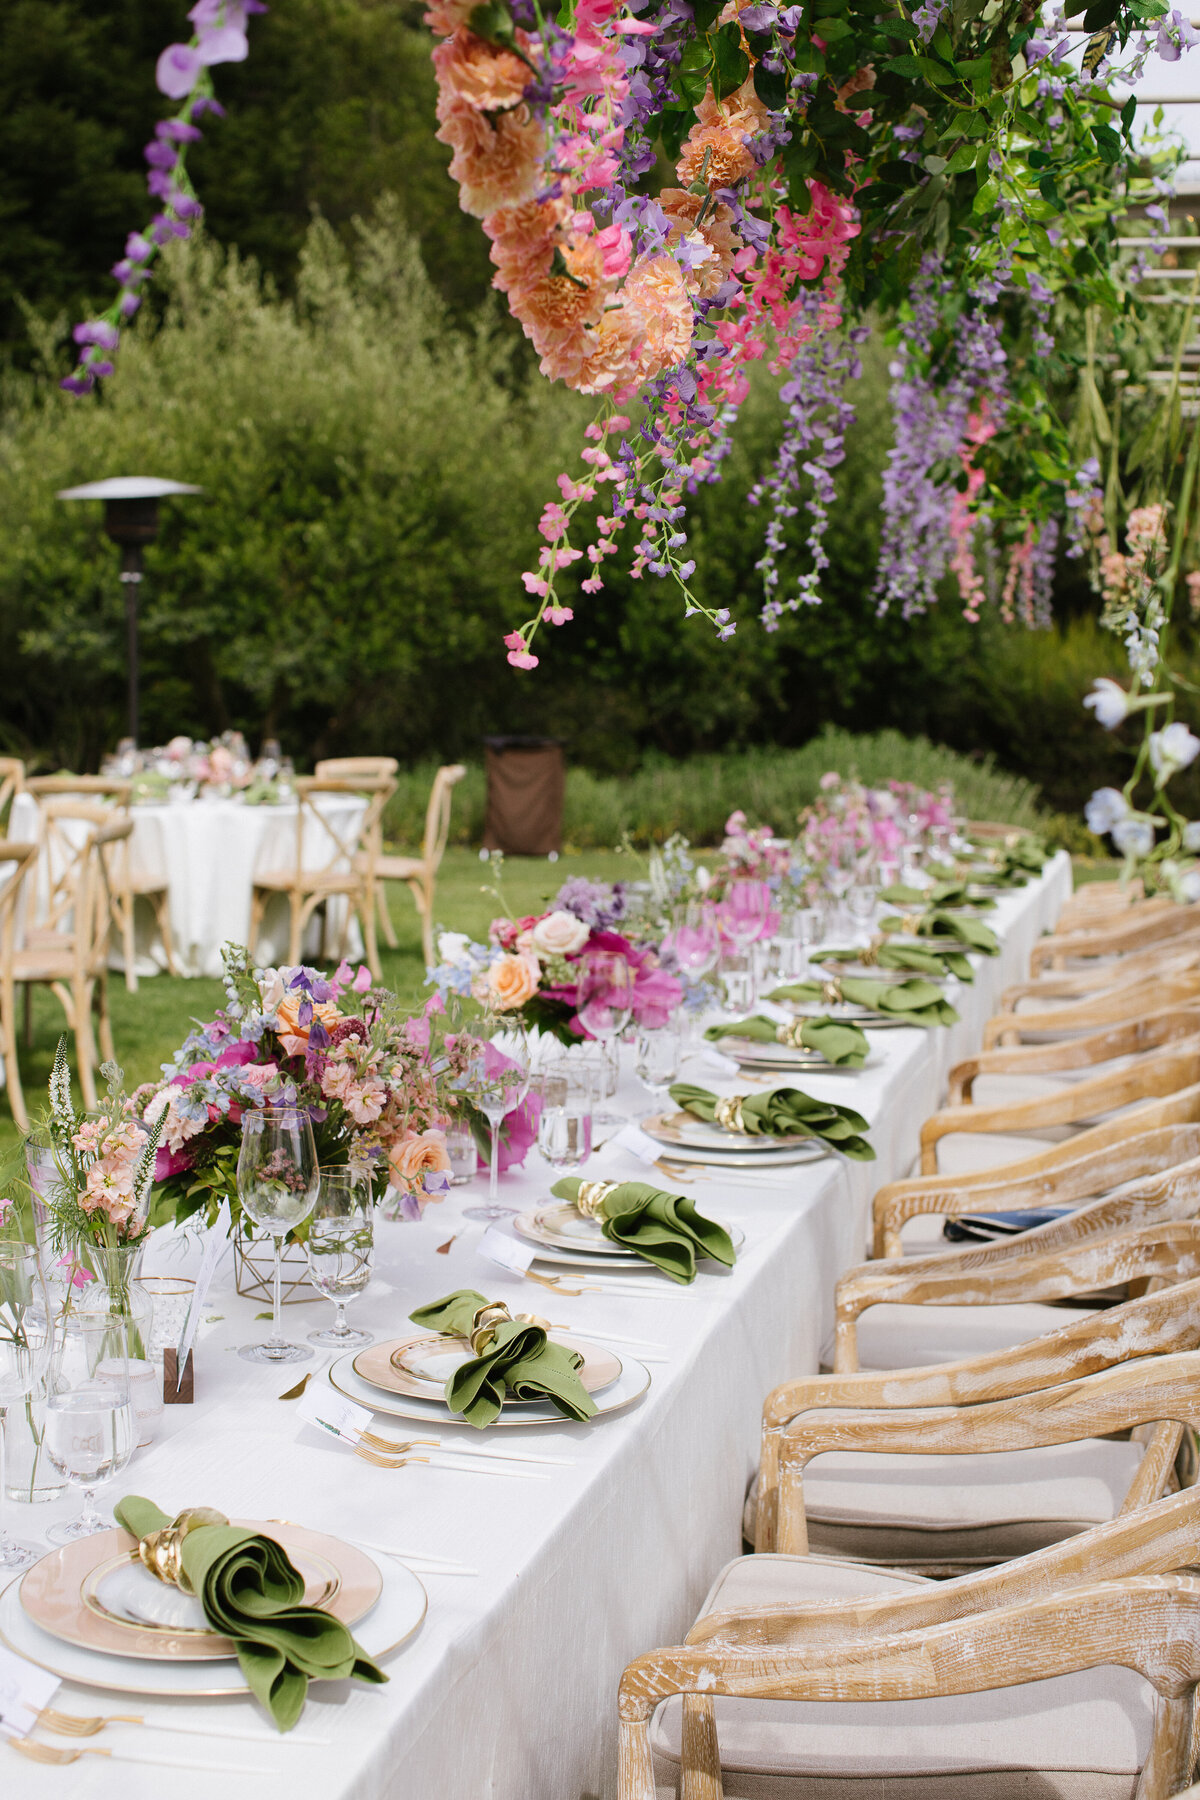 Colorful hanging flowers at head table